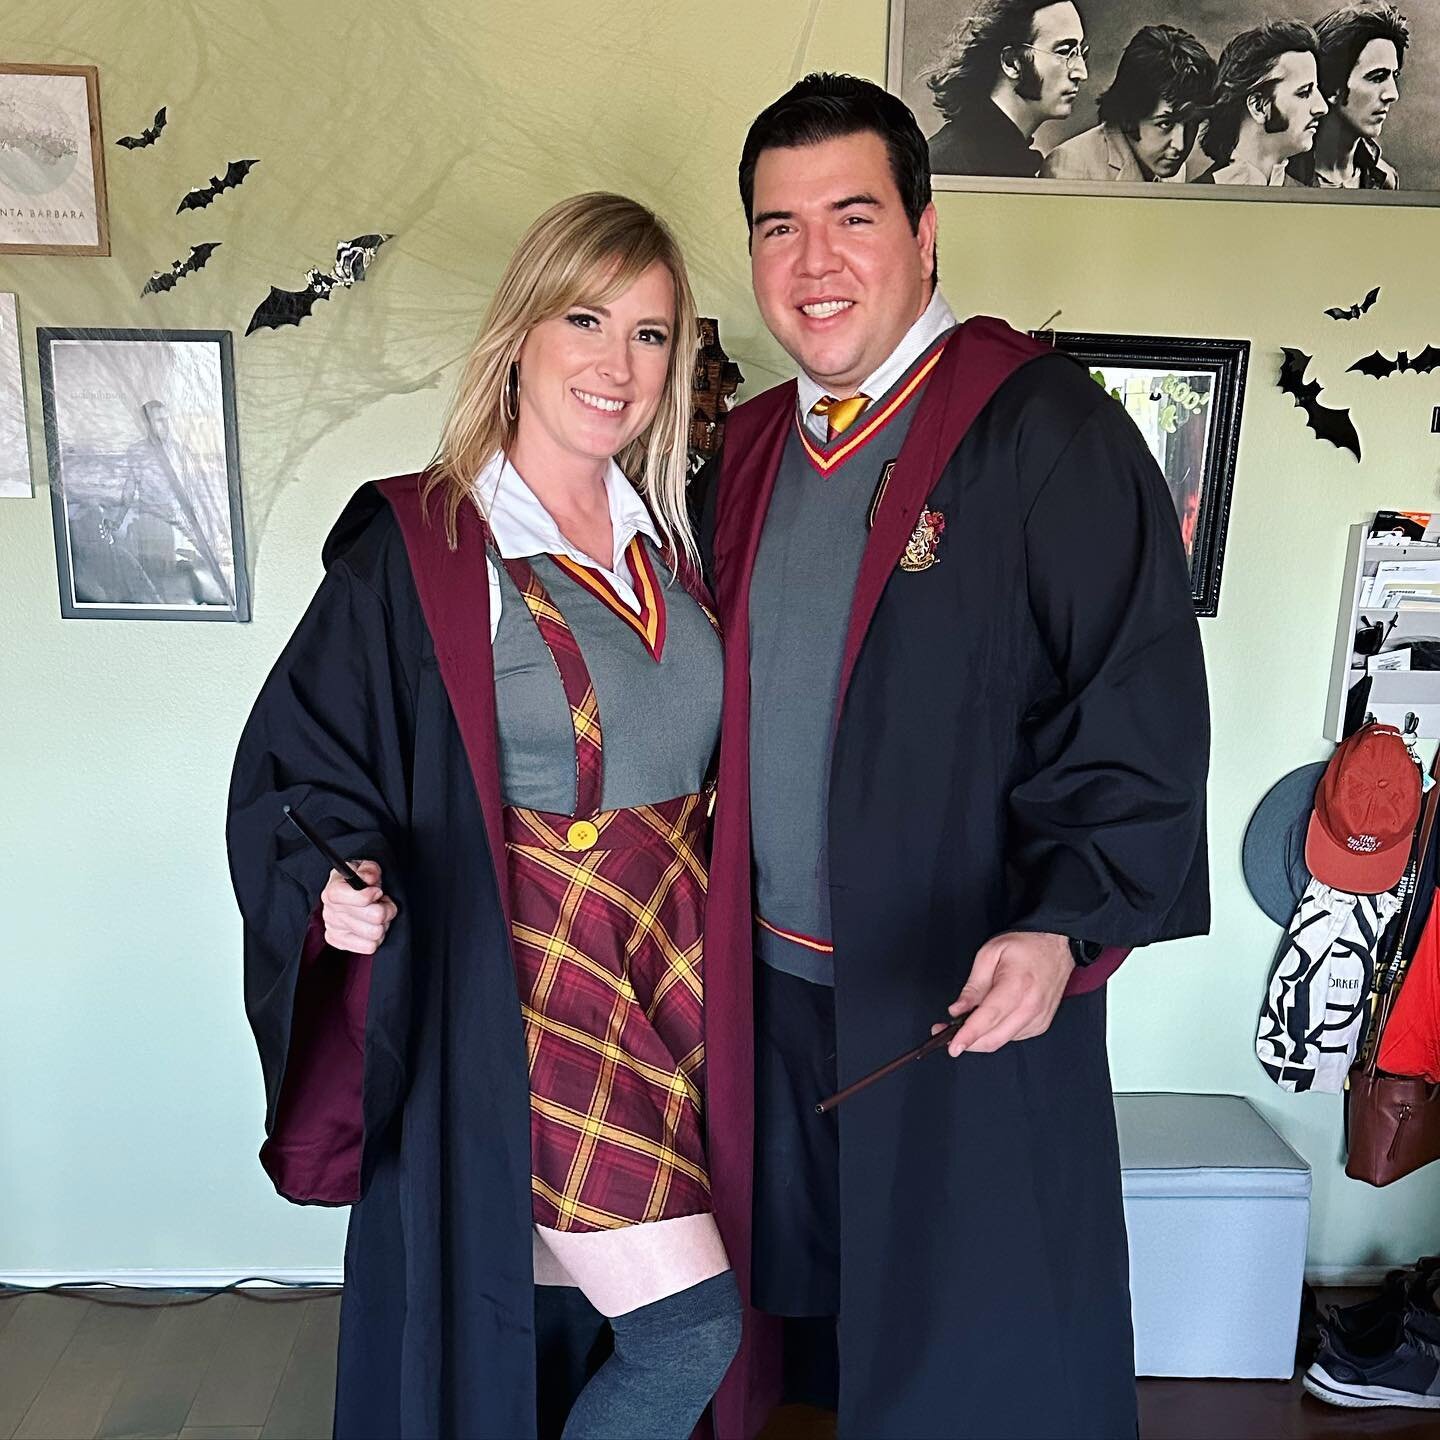 Wishing you all a magical &amp; safe Halloween from Hogwarts! #HappyHalloween #HarryPotterFans